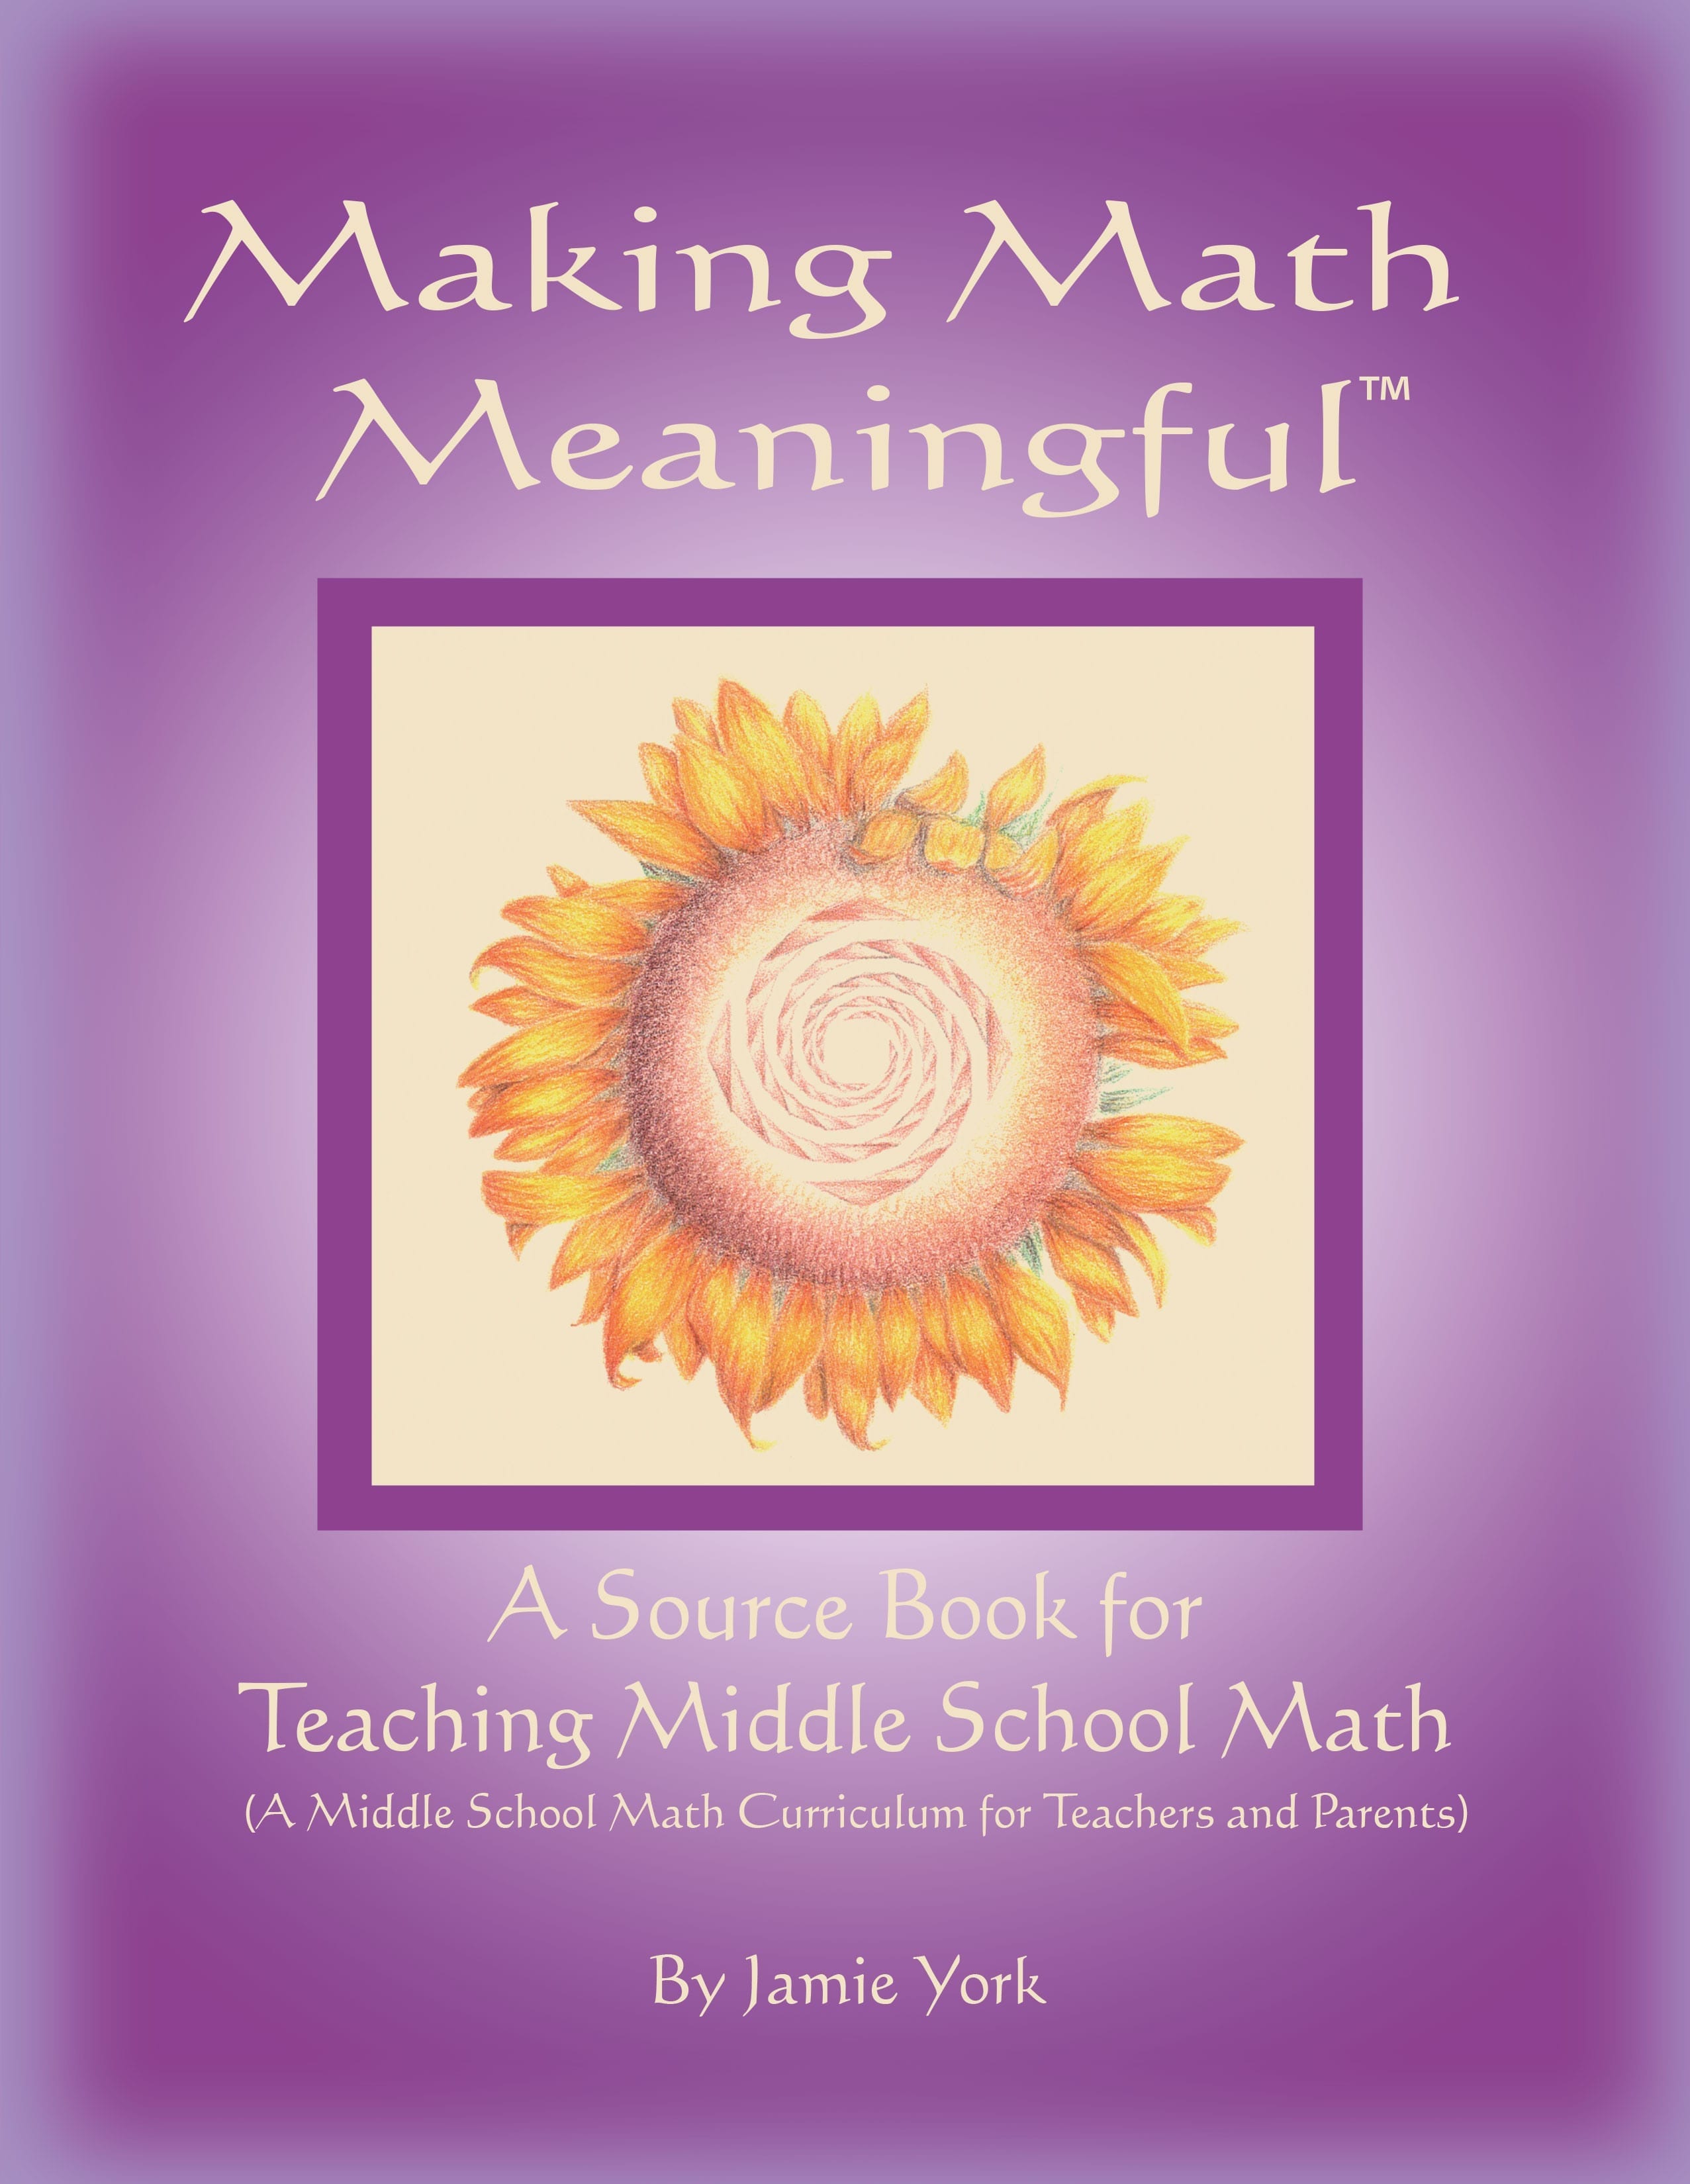 Source Book For Teaching Middle School Math